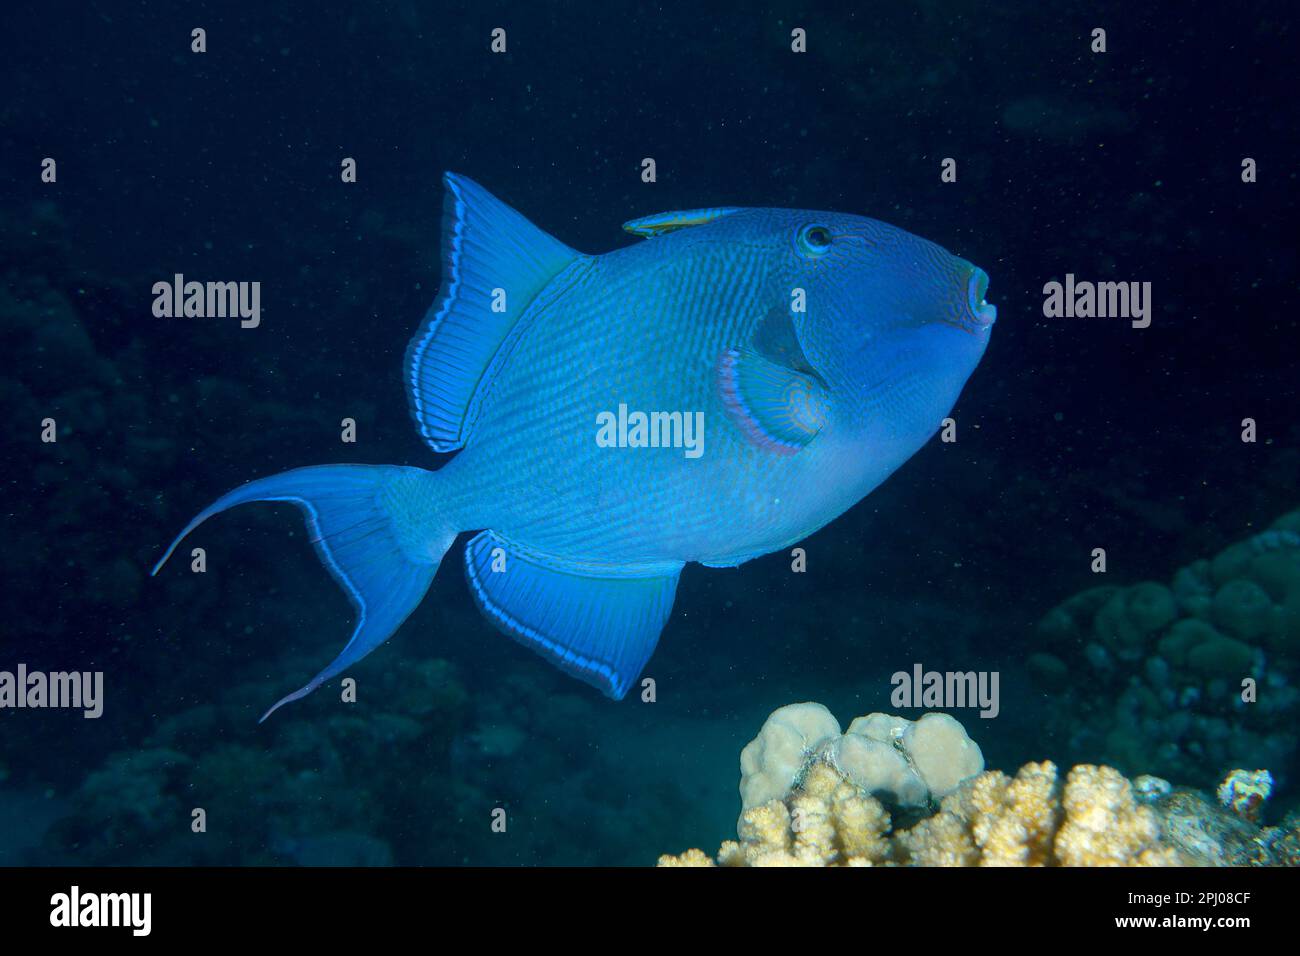 Blue triggerfish (Pseudobalistes fuscus) at night, releasable. Dive site House Reef, Mangrove Bay, El Quesir, Red Sea, Egypt Stock Photo